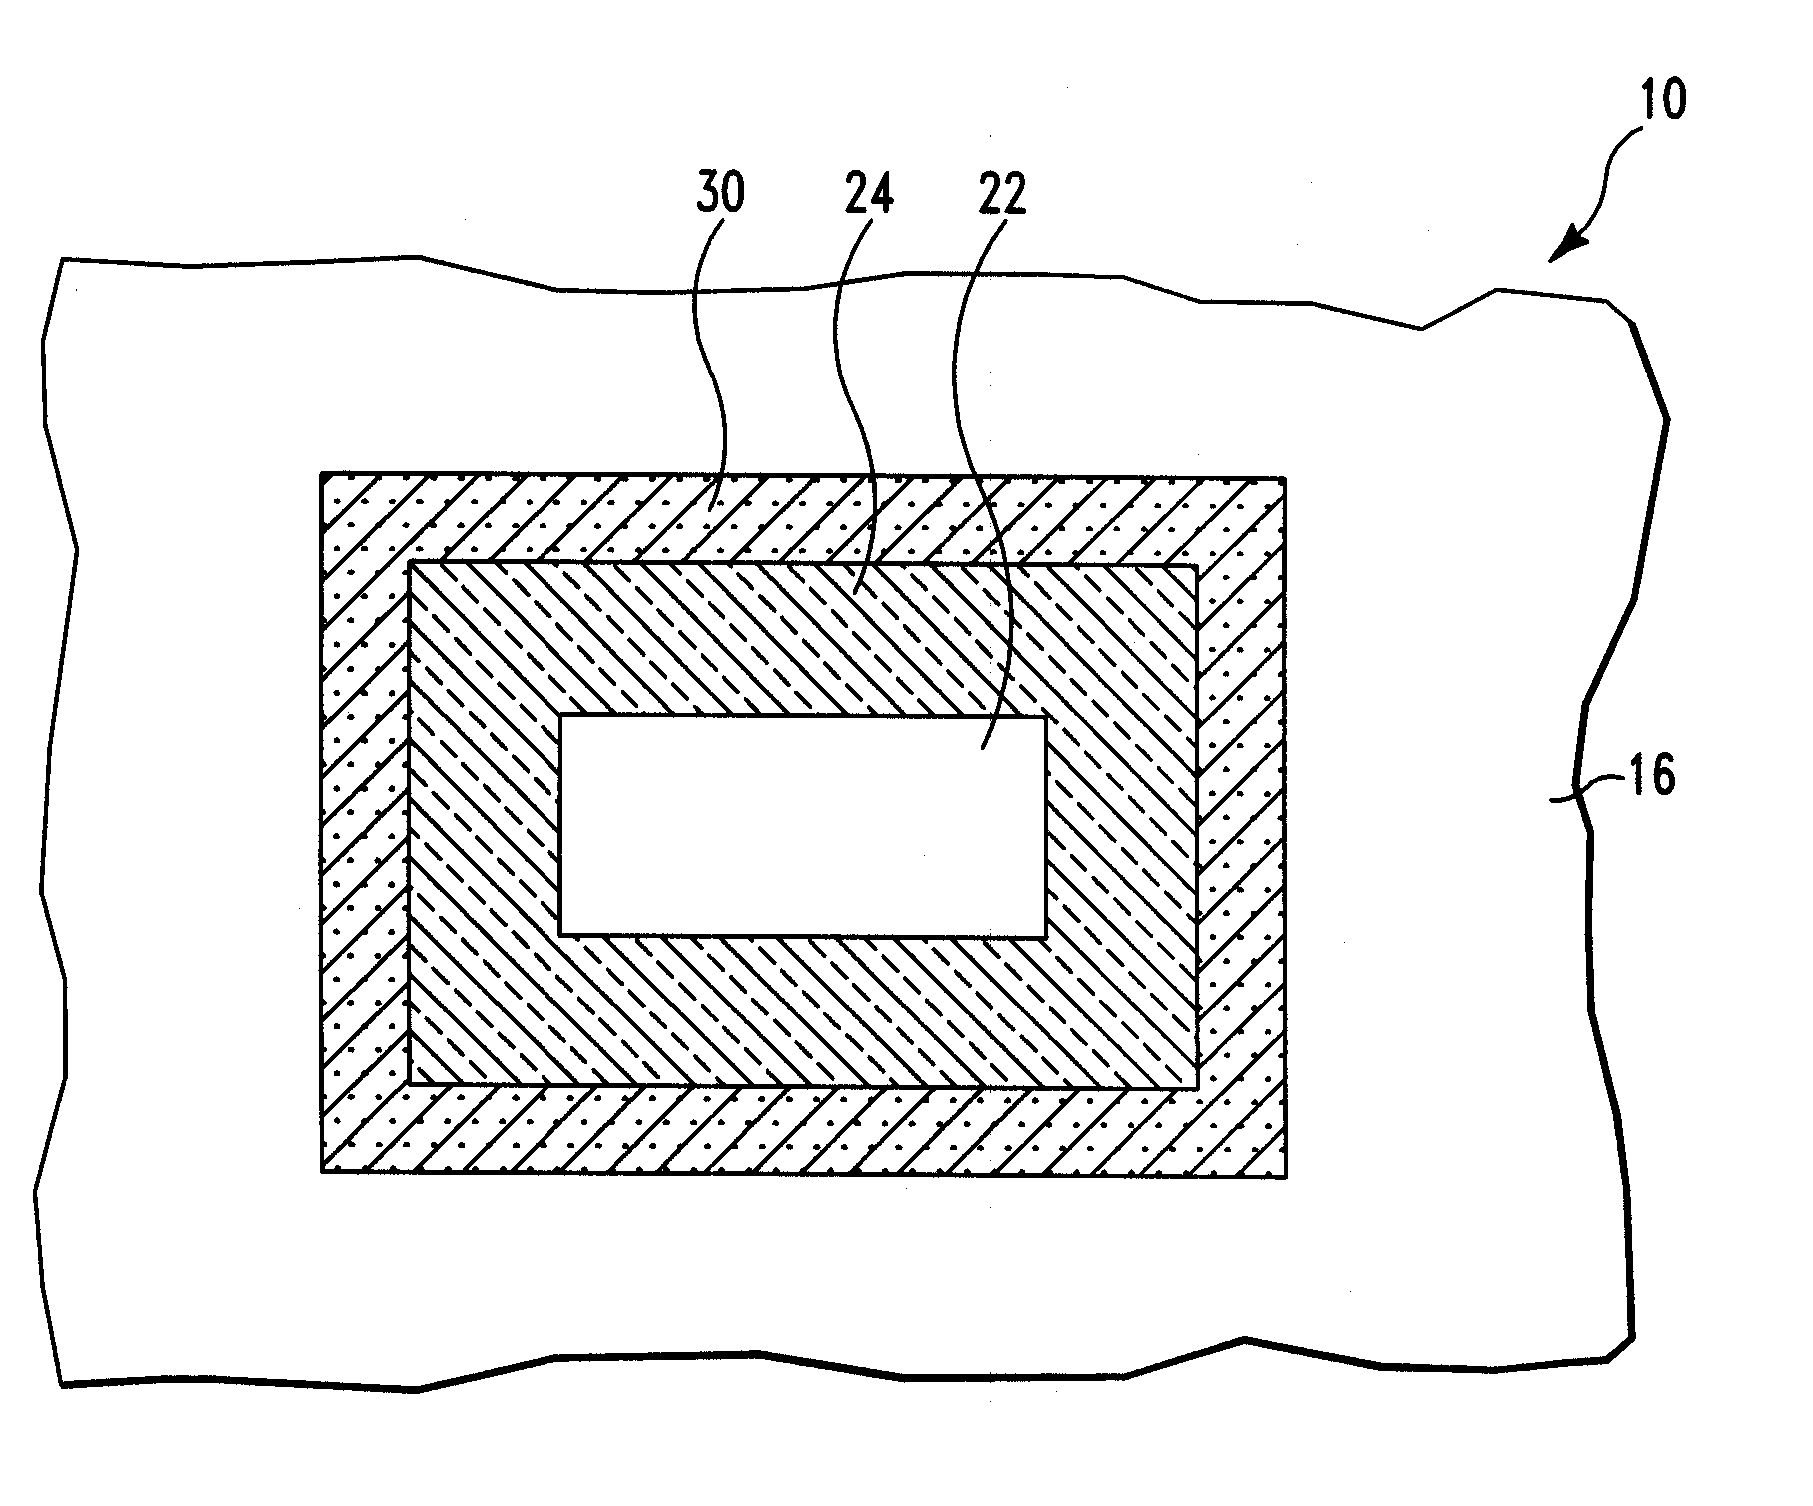 Multiple layer structure for substrate noise isolation